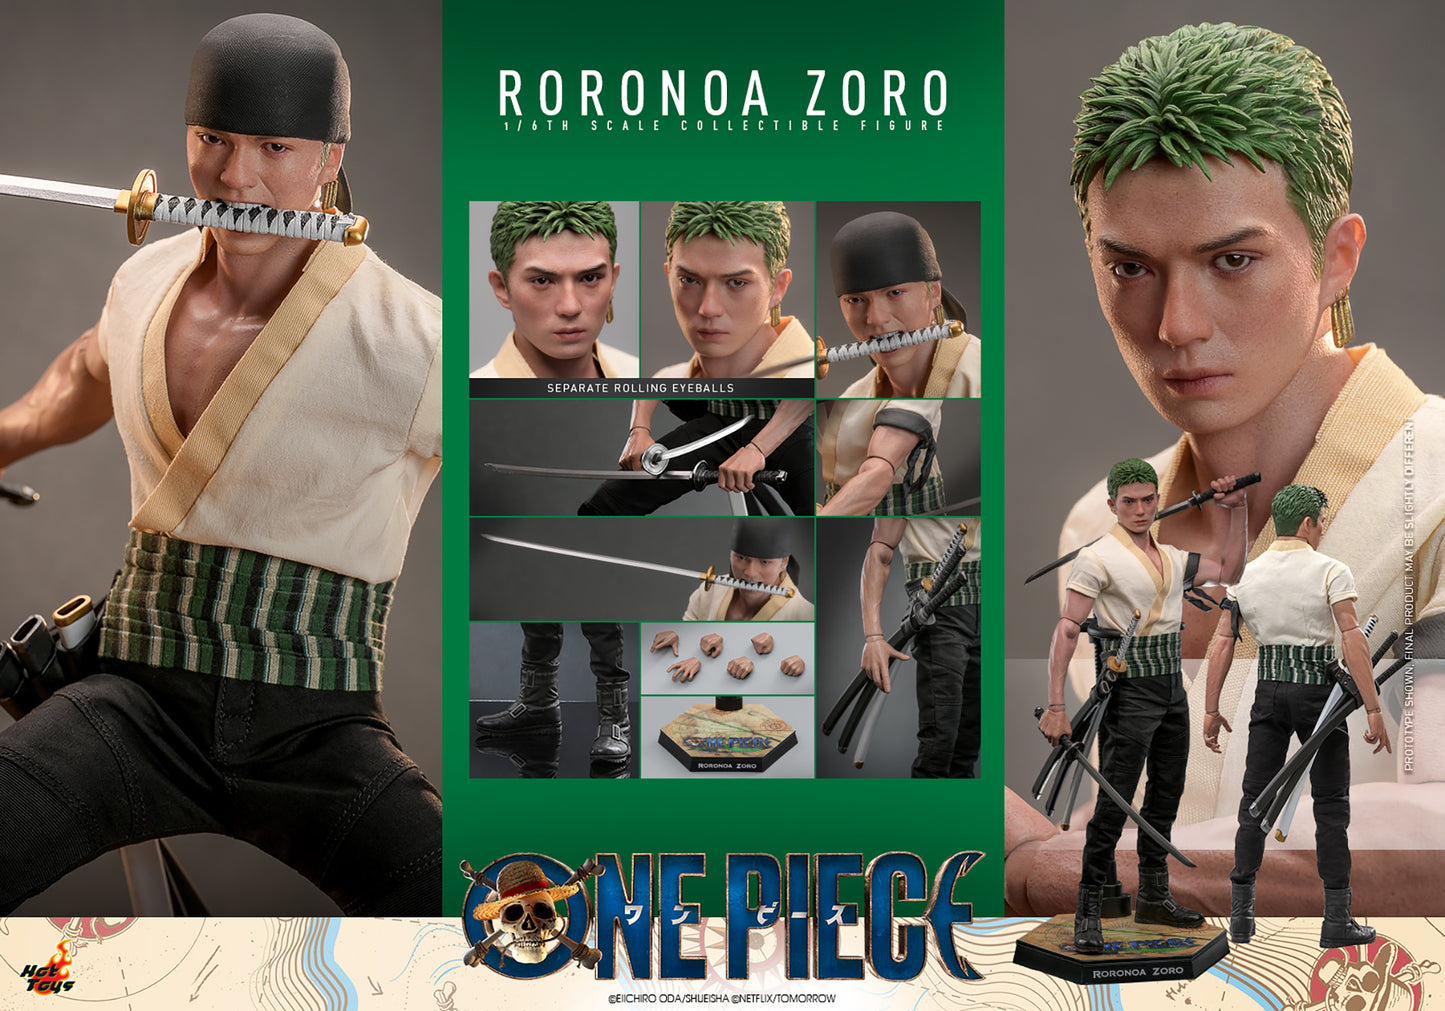 One Piece Roronoa Zoro 1/6 Scale Figure by Hot Toys